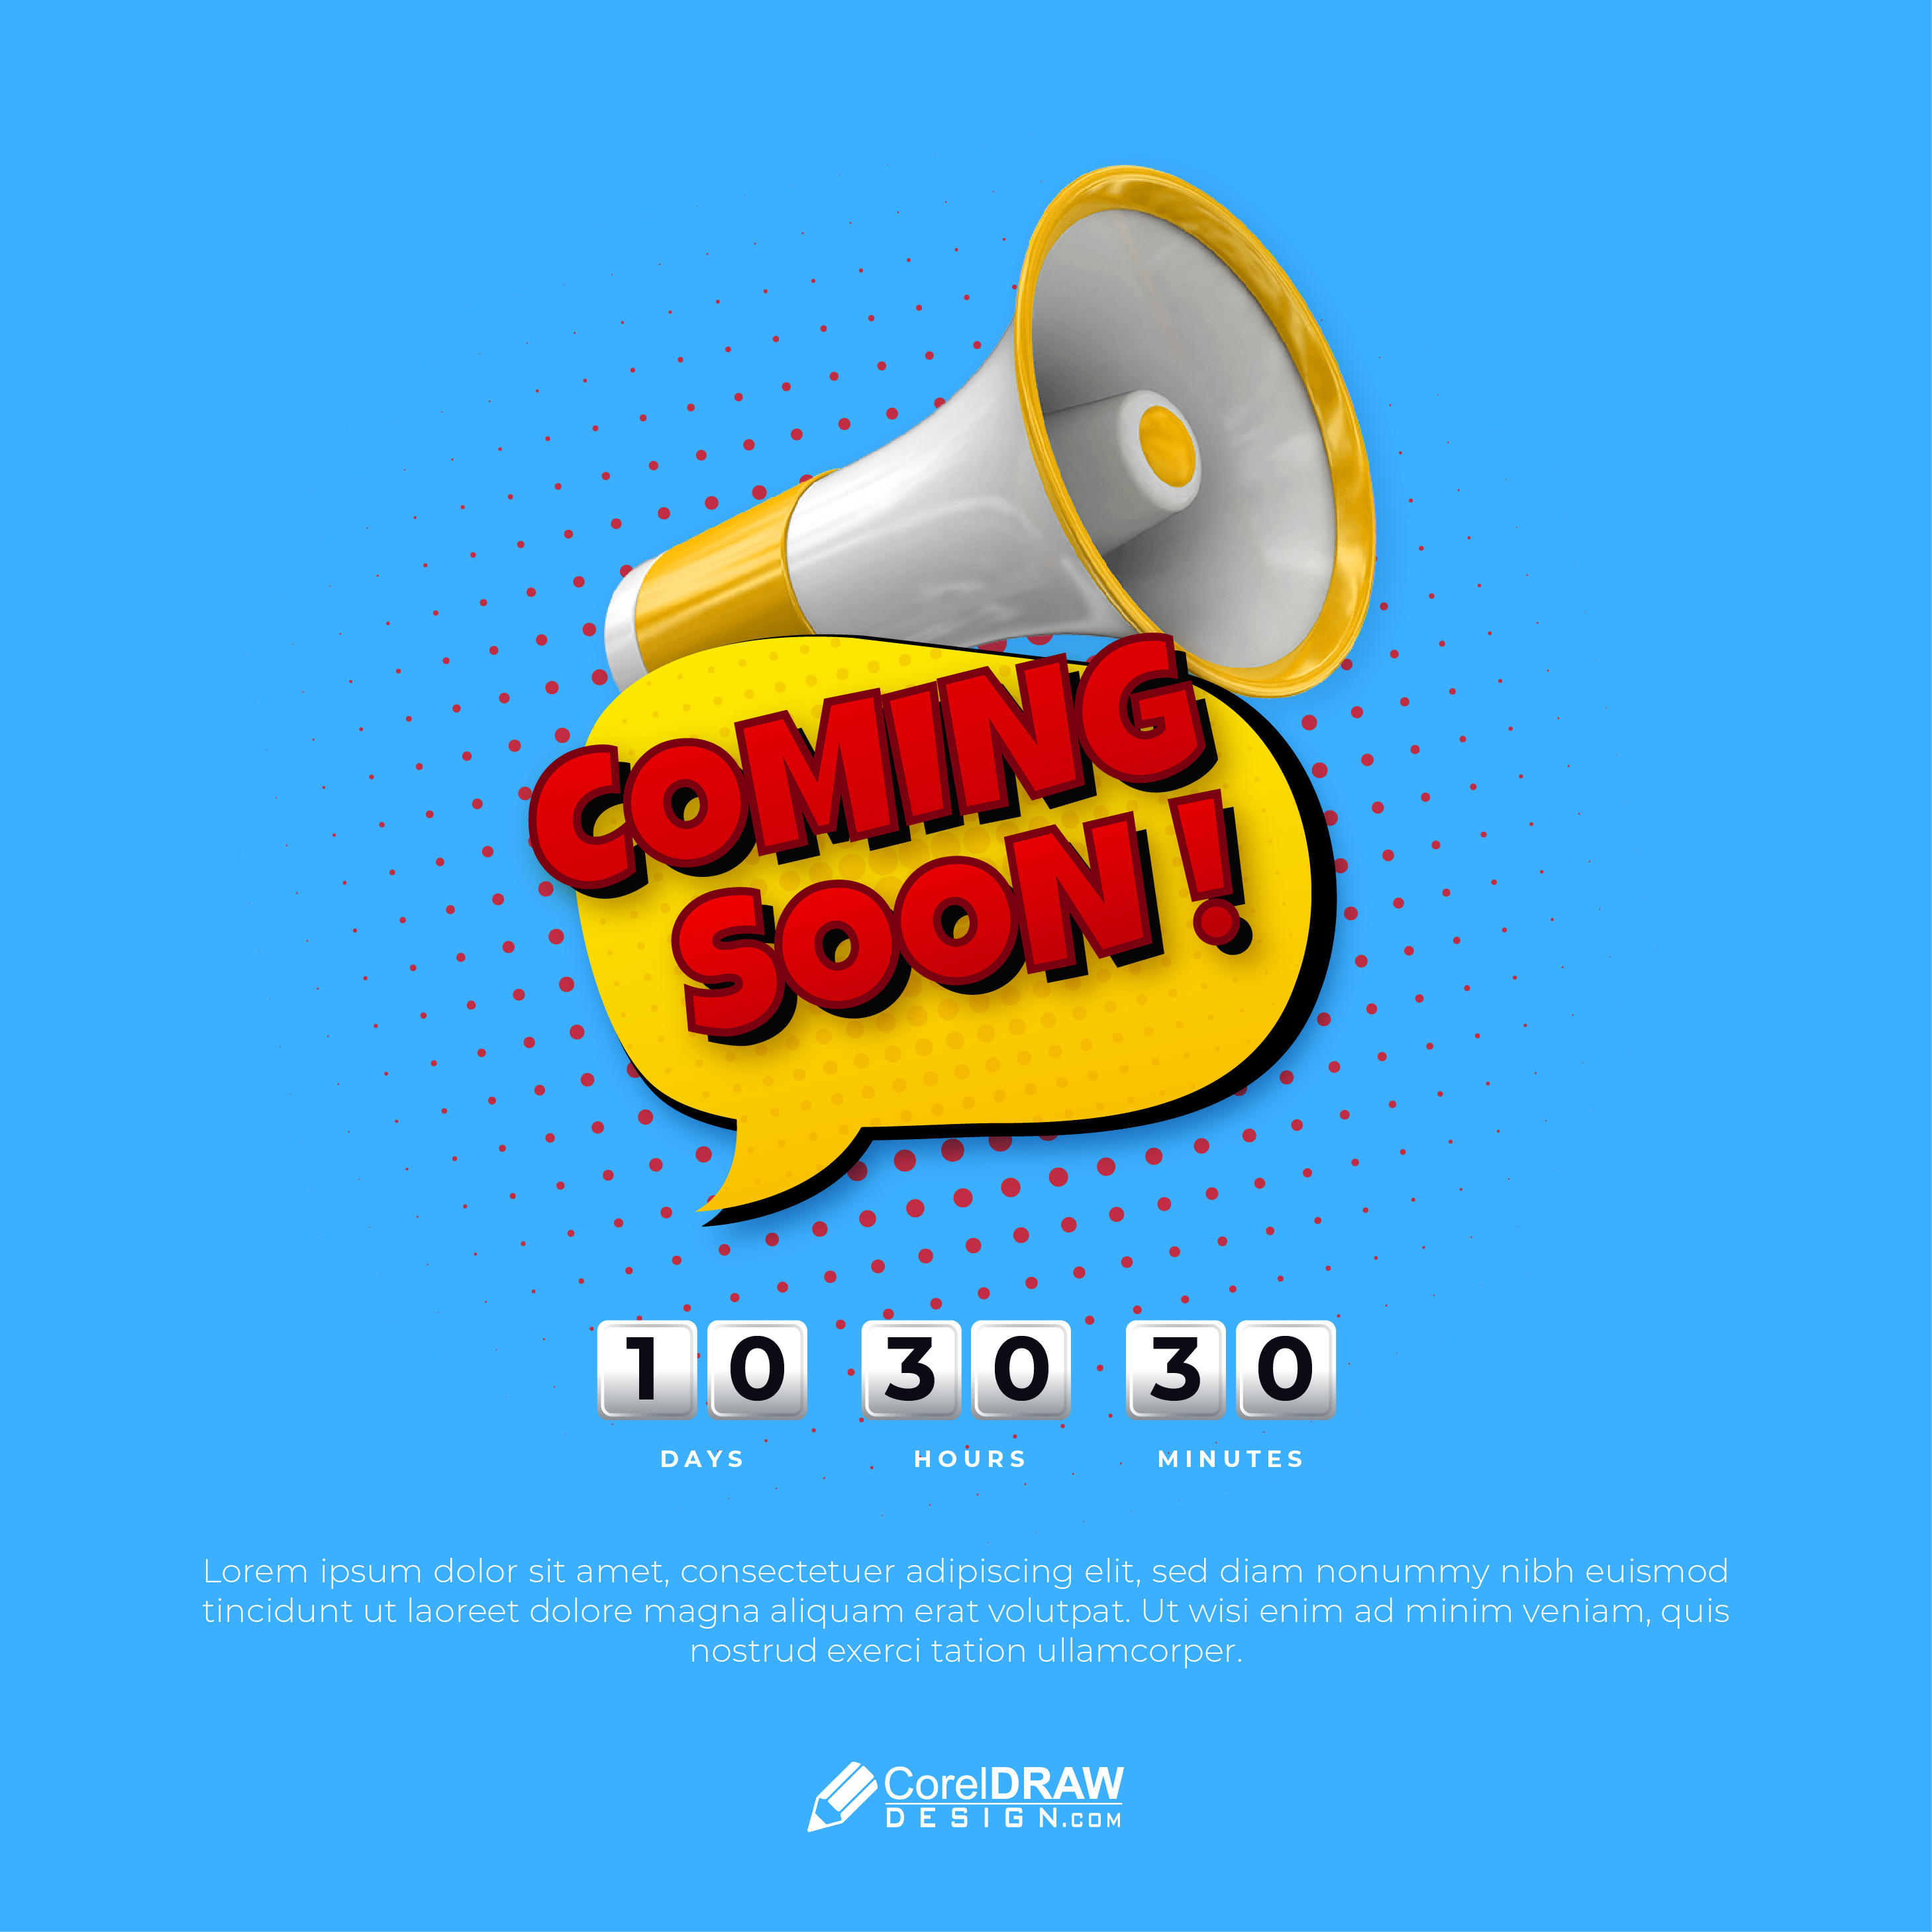 Download Abstract Coming Soon Creative Poster Template | CorelDraw